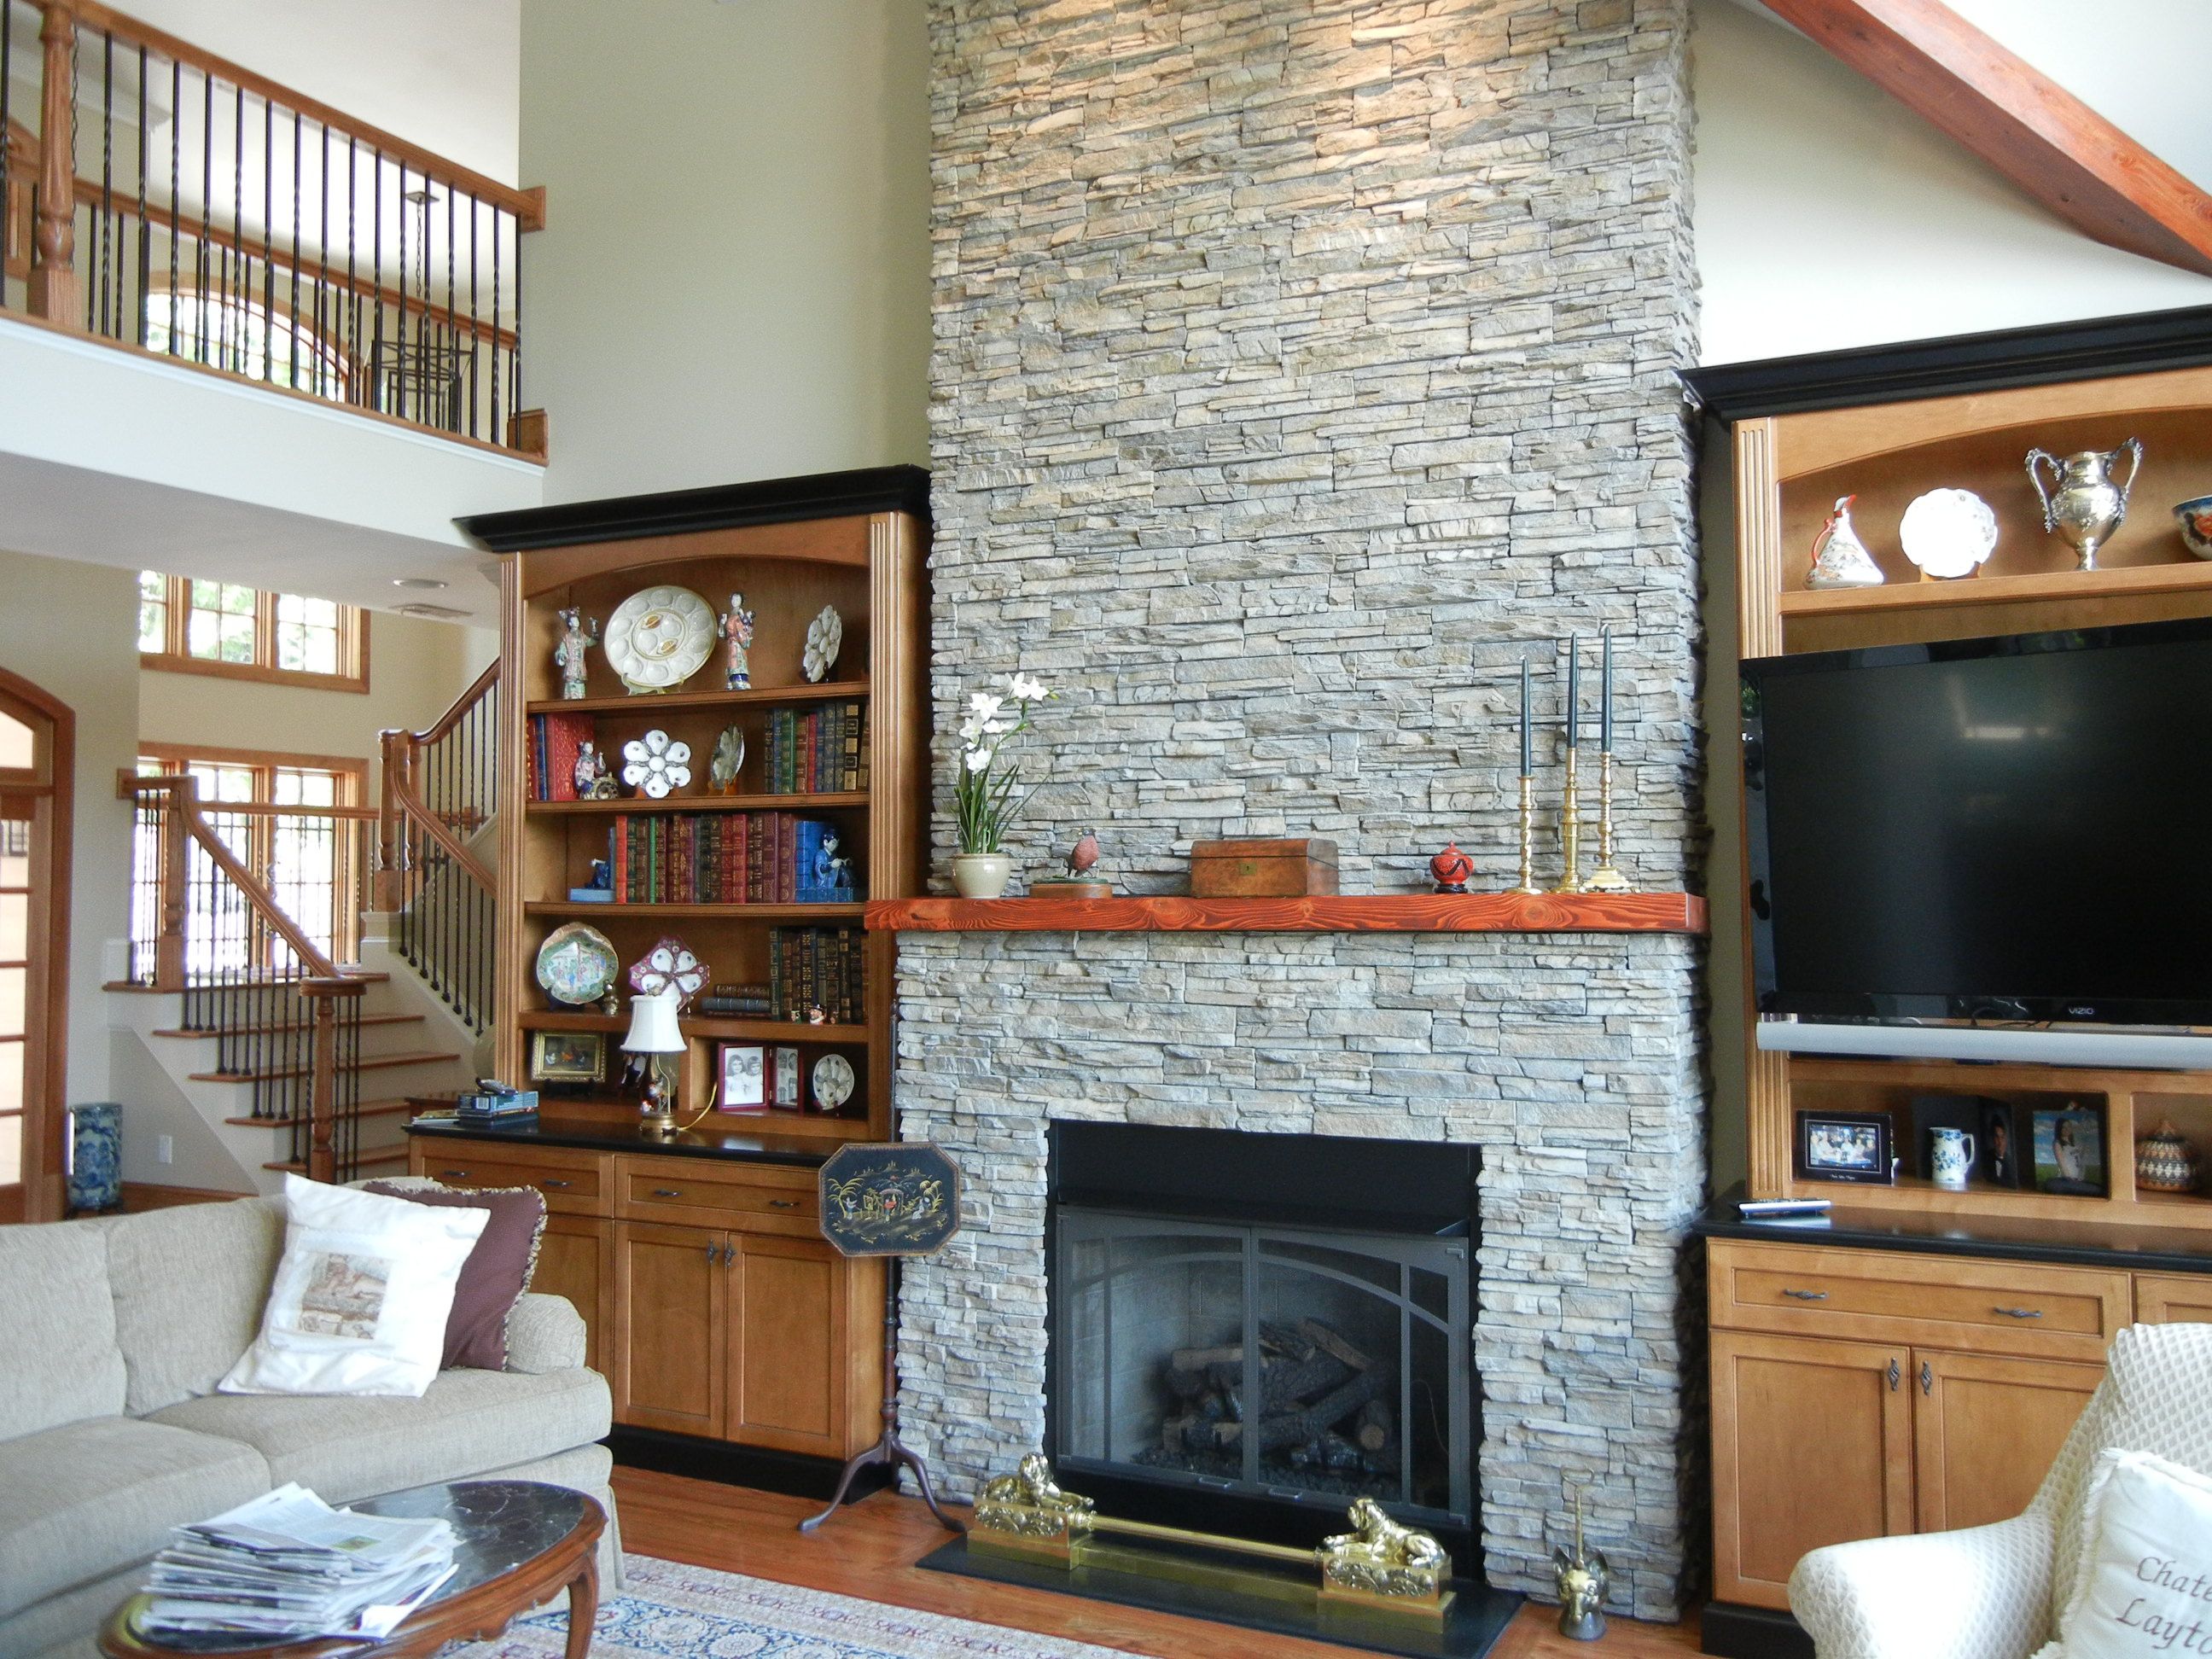 Stone Fireplaces Designs Inspirational Stone Fireplace Surrounded by Built In Bookshelves Creates A